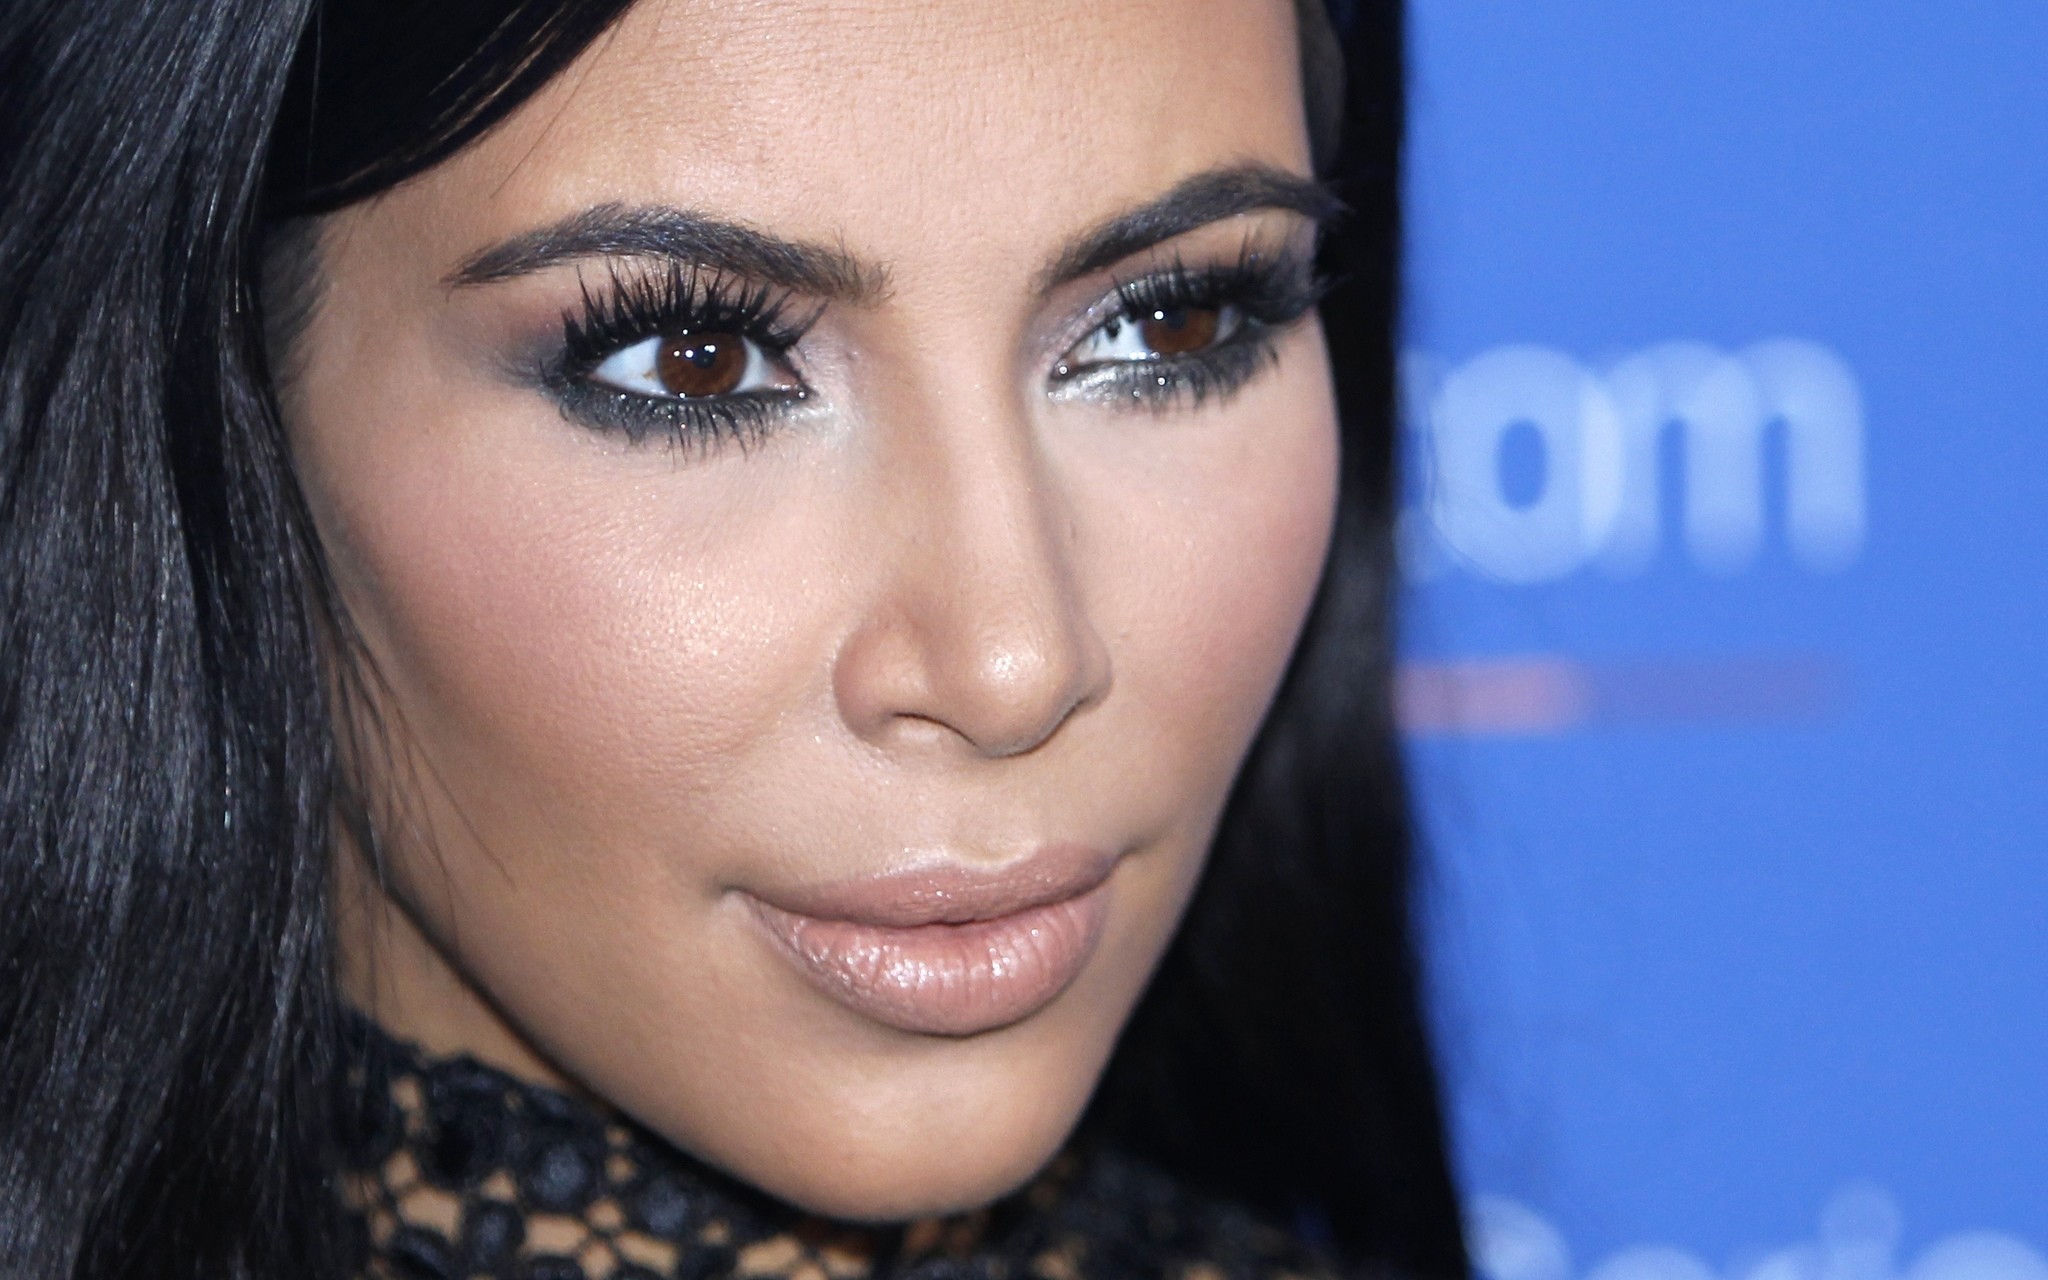 In this June 24, 2015, file photo, Kim Kardashian West poses during a photo call at the Cannes Lions 2015. (AP Photo)